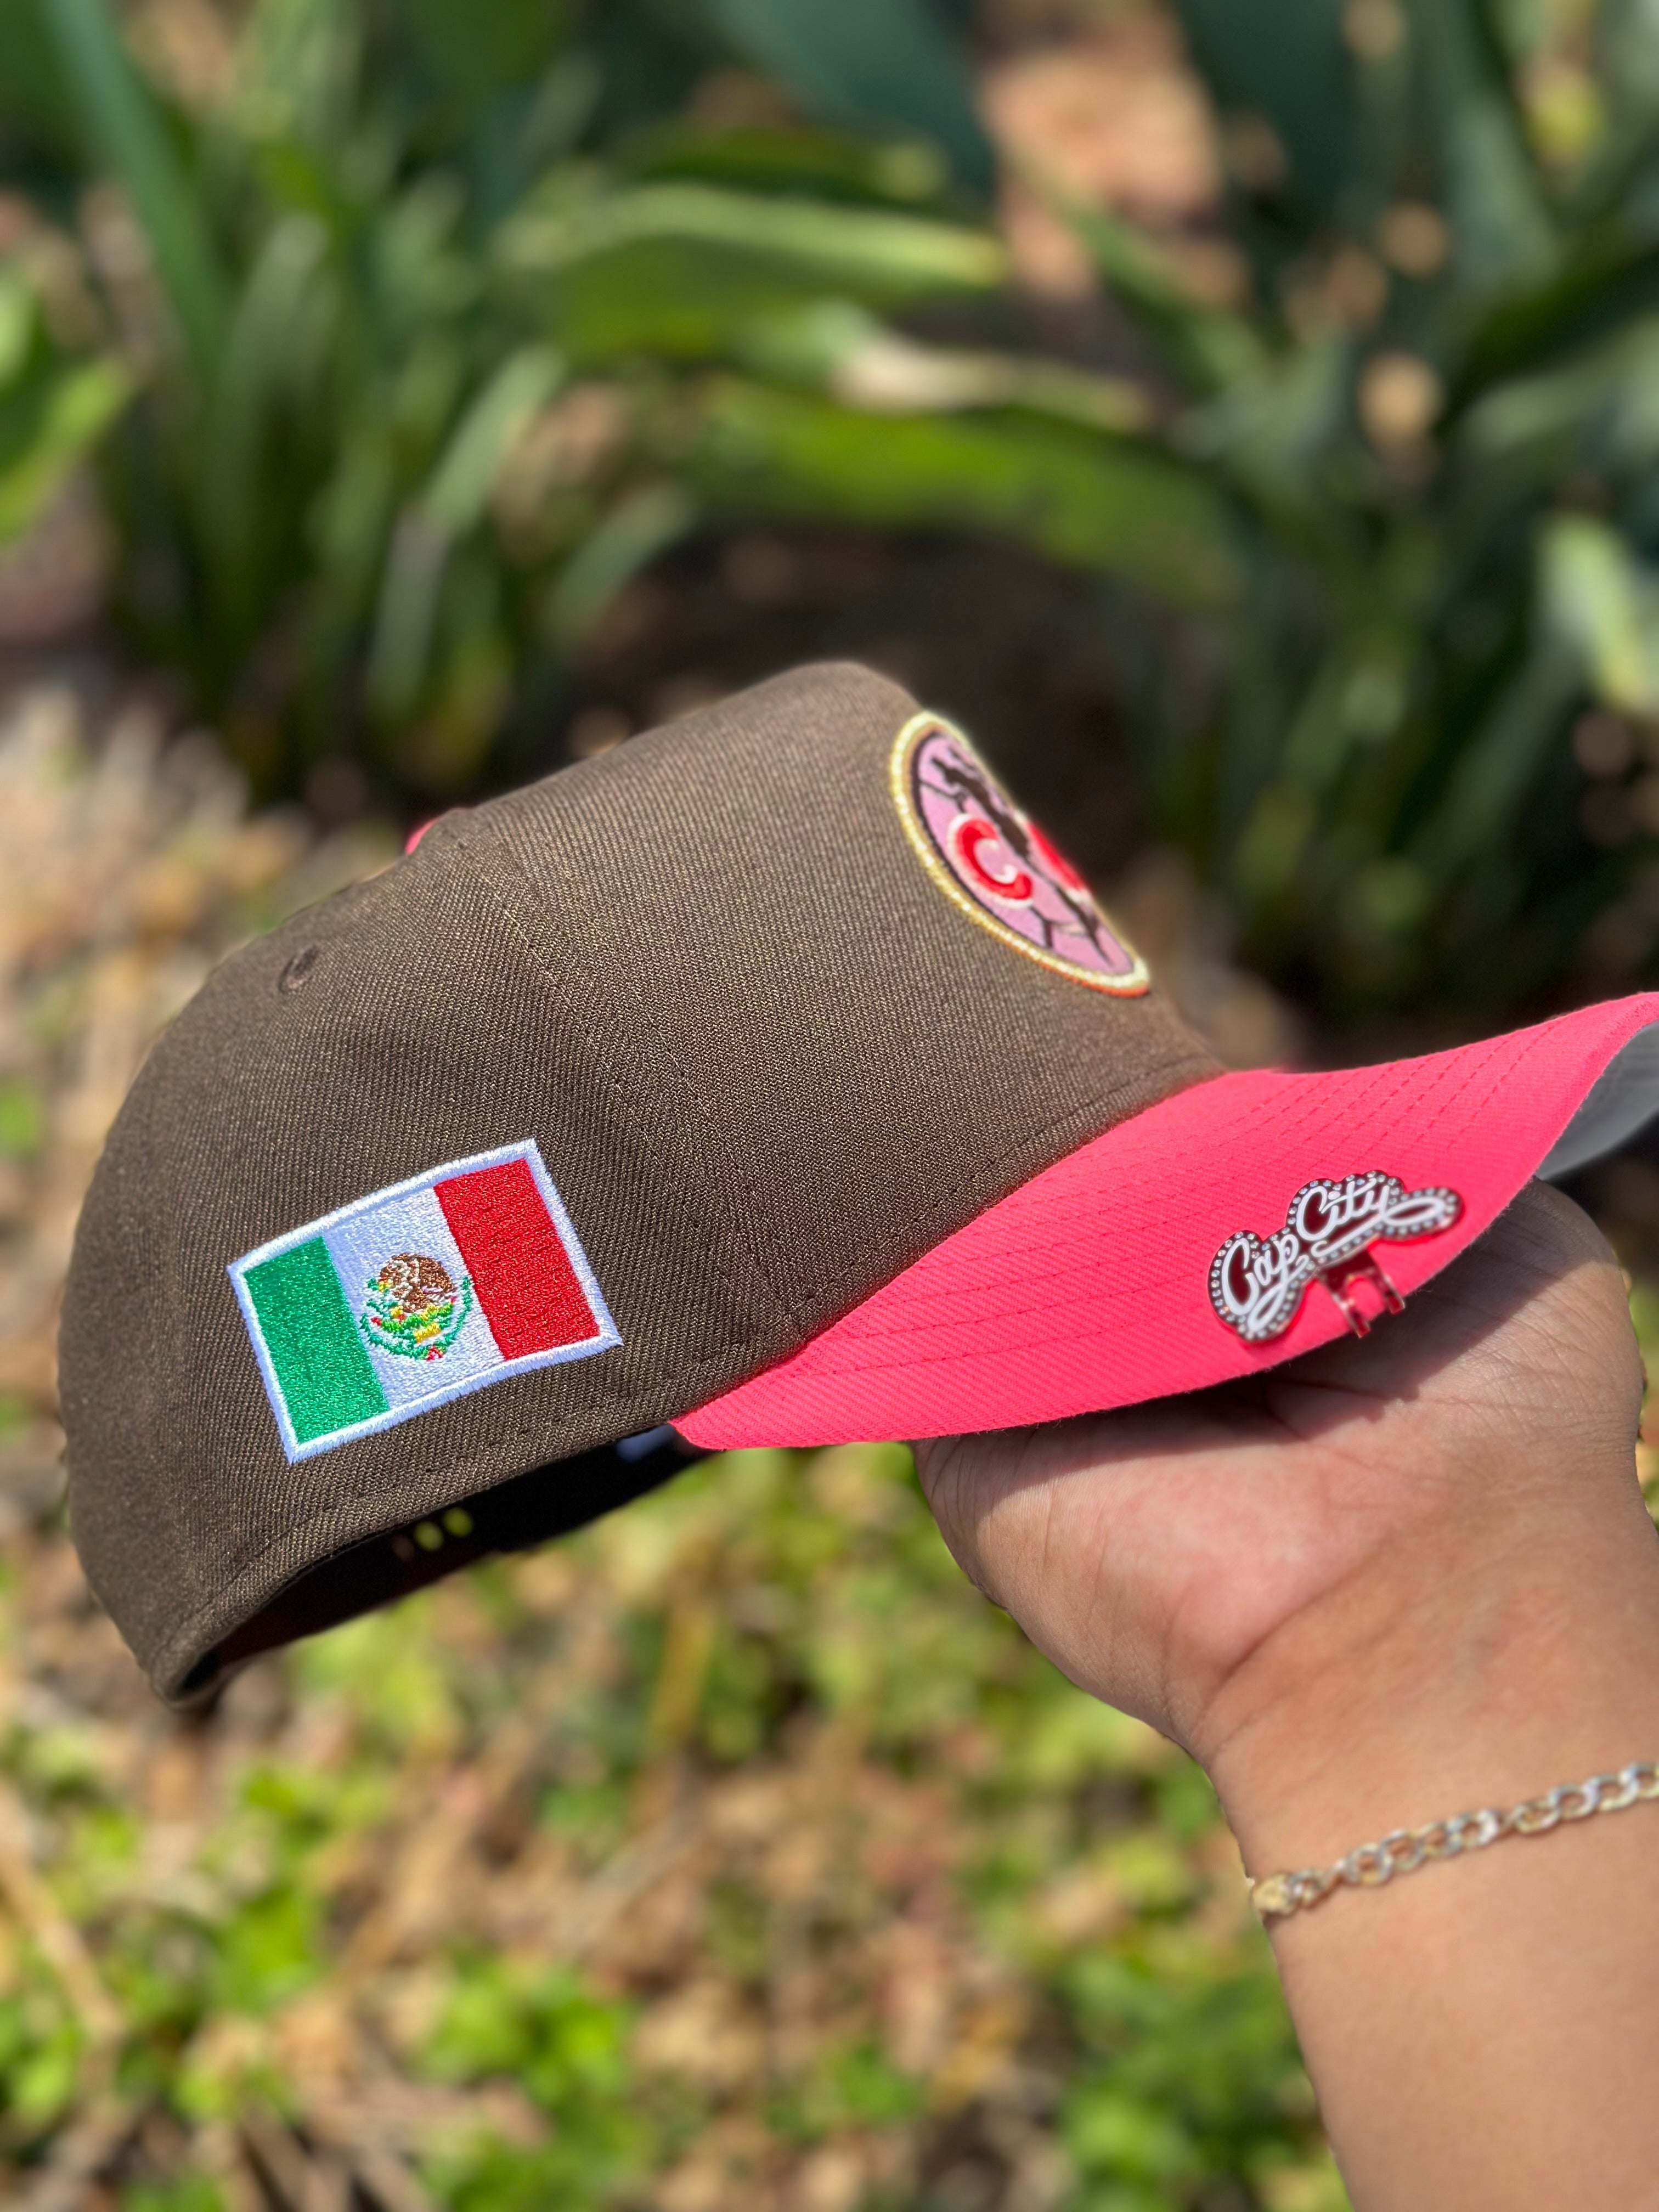 NEW ERA EXCLUSIVE 9FIFTY A-FRAME MOCHA/NEON PINK "CLUB AMERICA" SNAPBACK W/ MEXICO FLAG SIDE PATCH